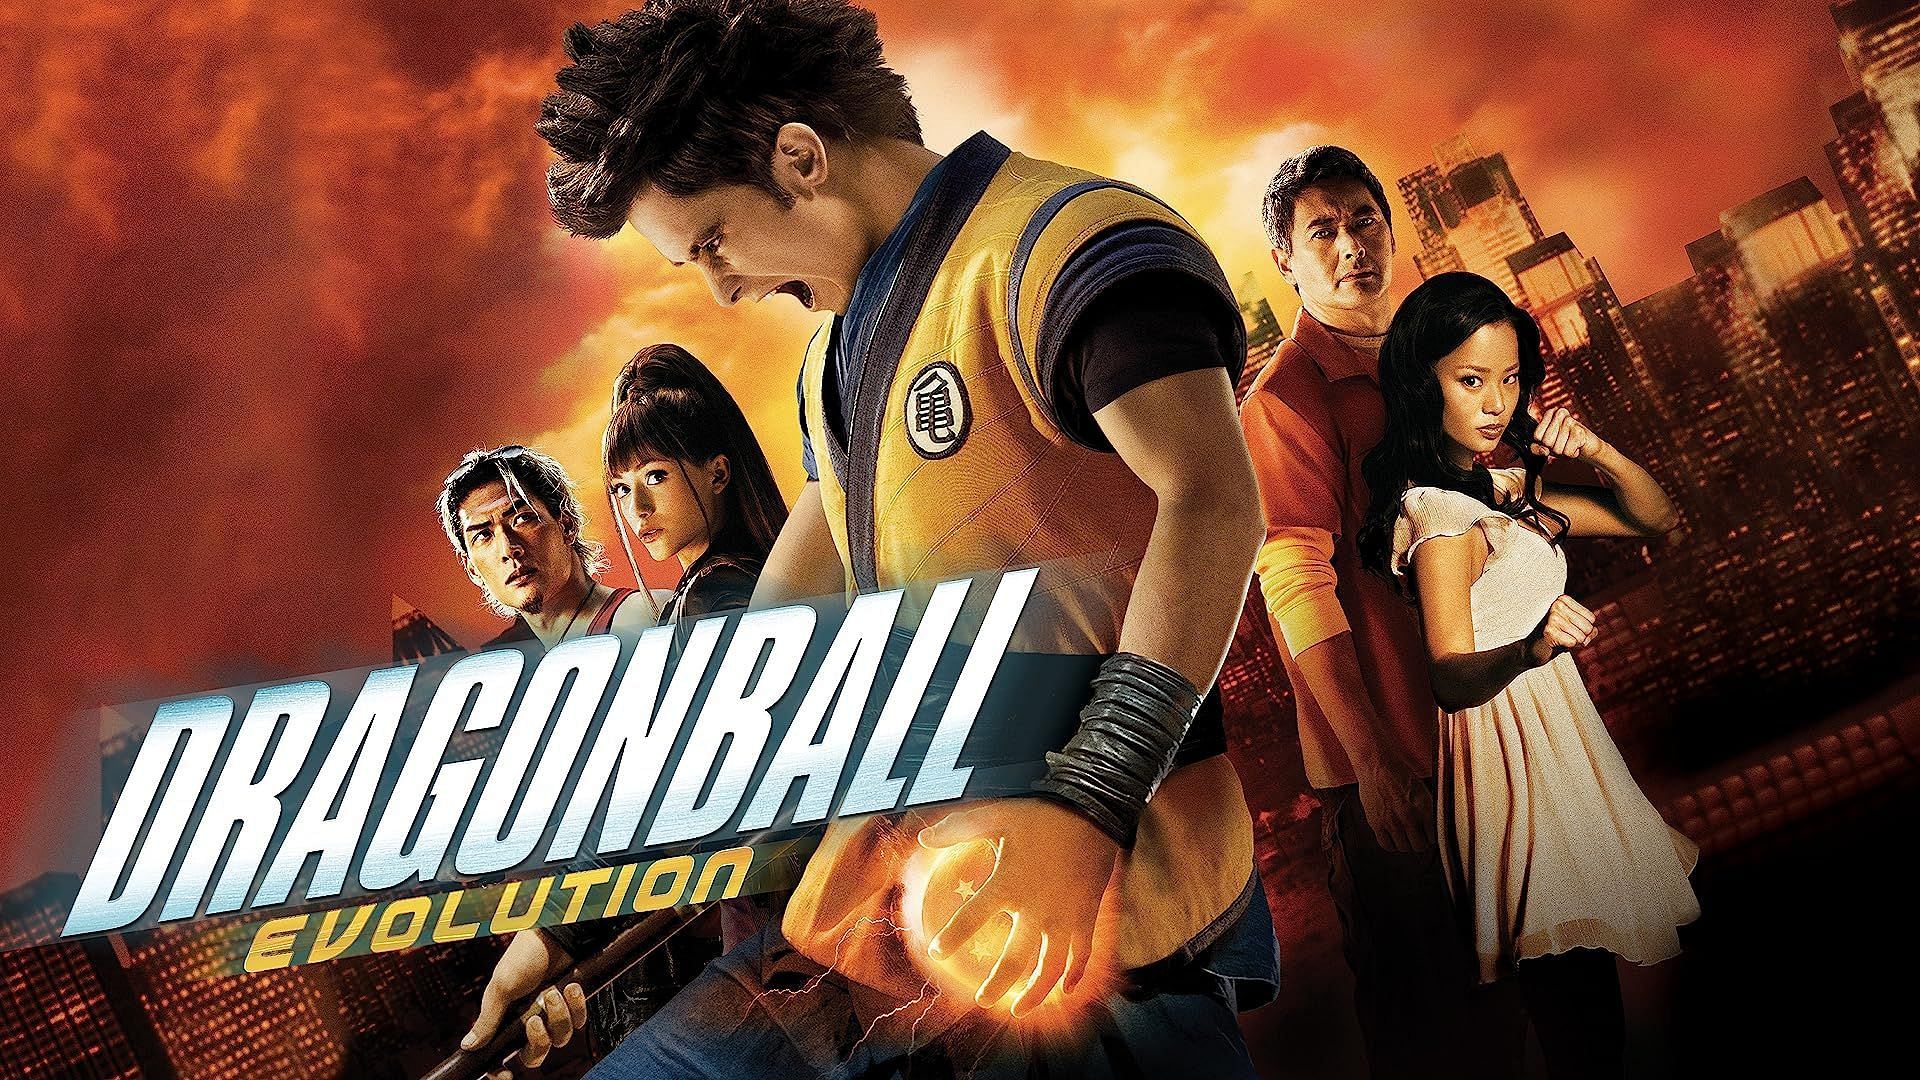 Dragonball Evolution, Action and adventure films